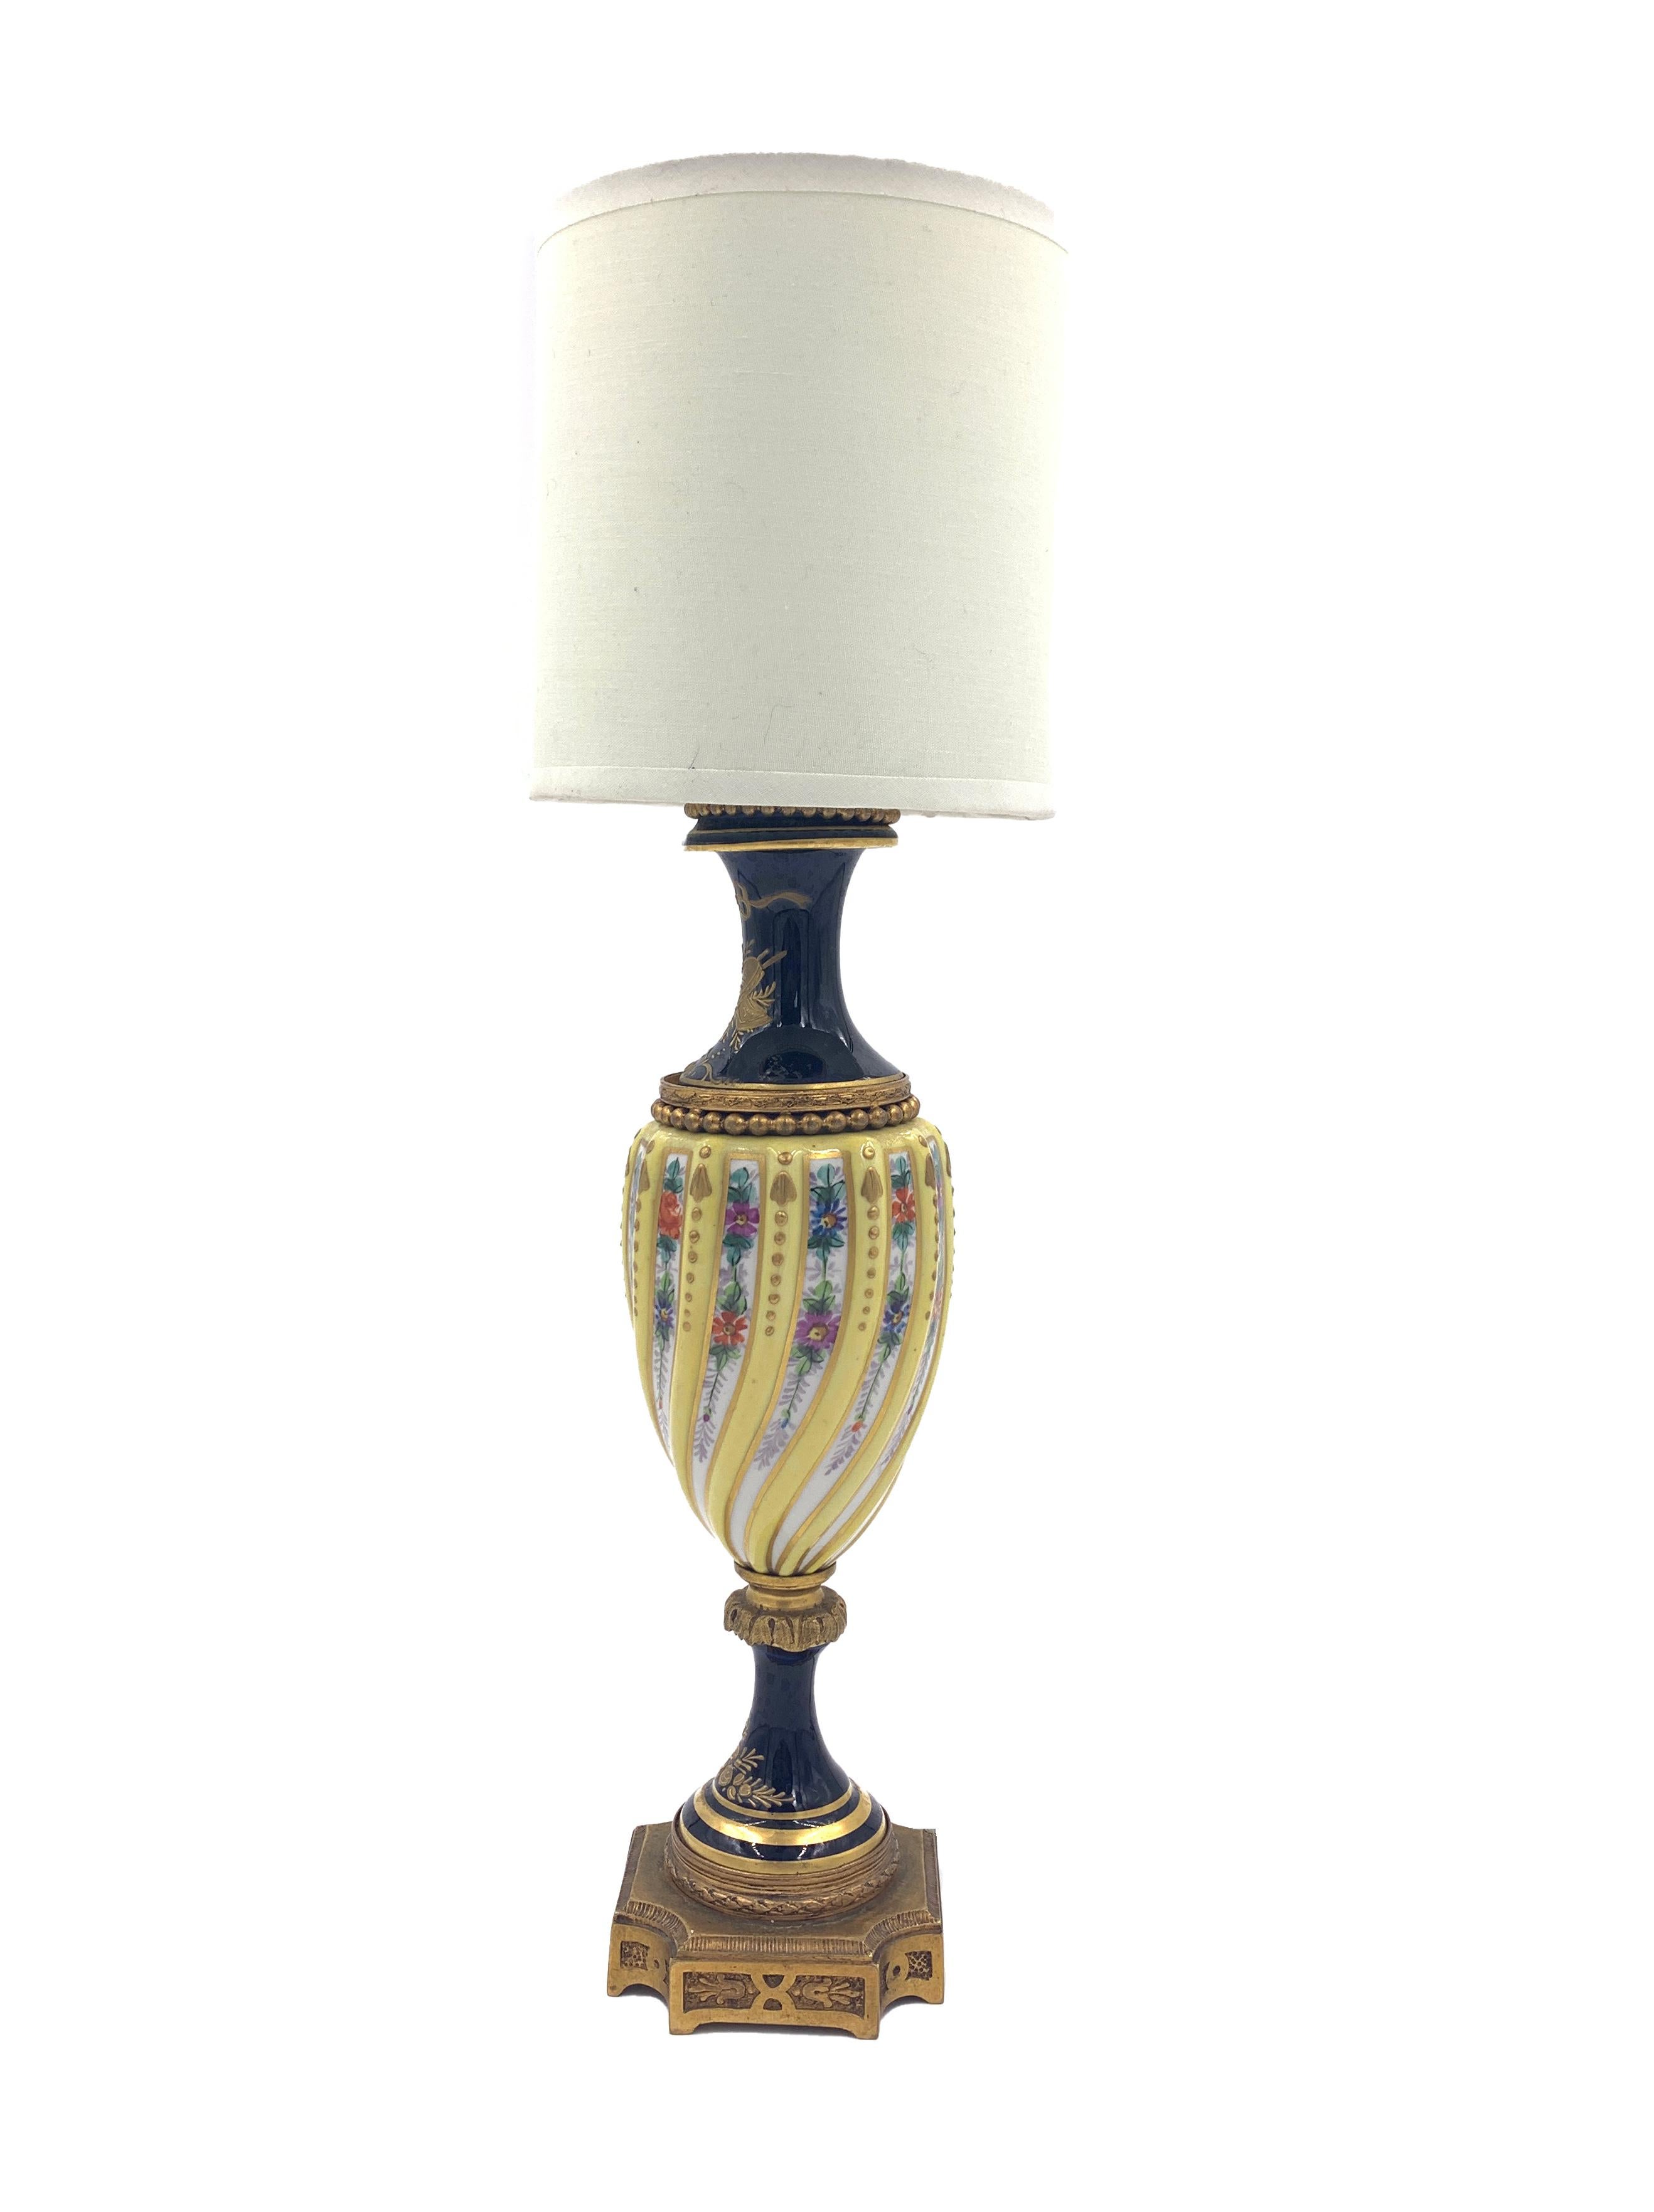 A fine yellow and blue porcelain Sevres style lamp with a twist body, hand painted with flowers and hand gilded.
 